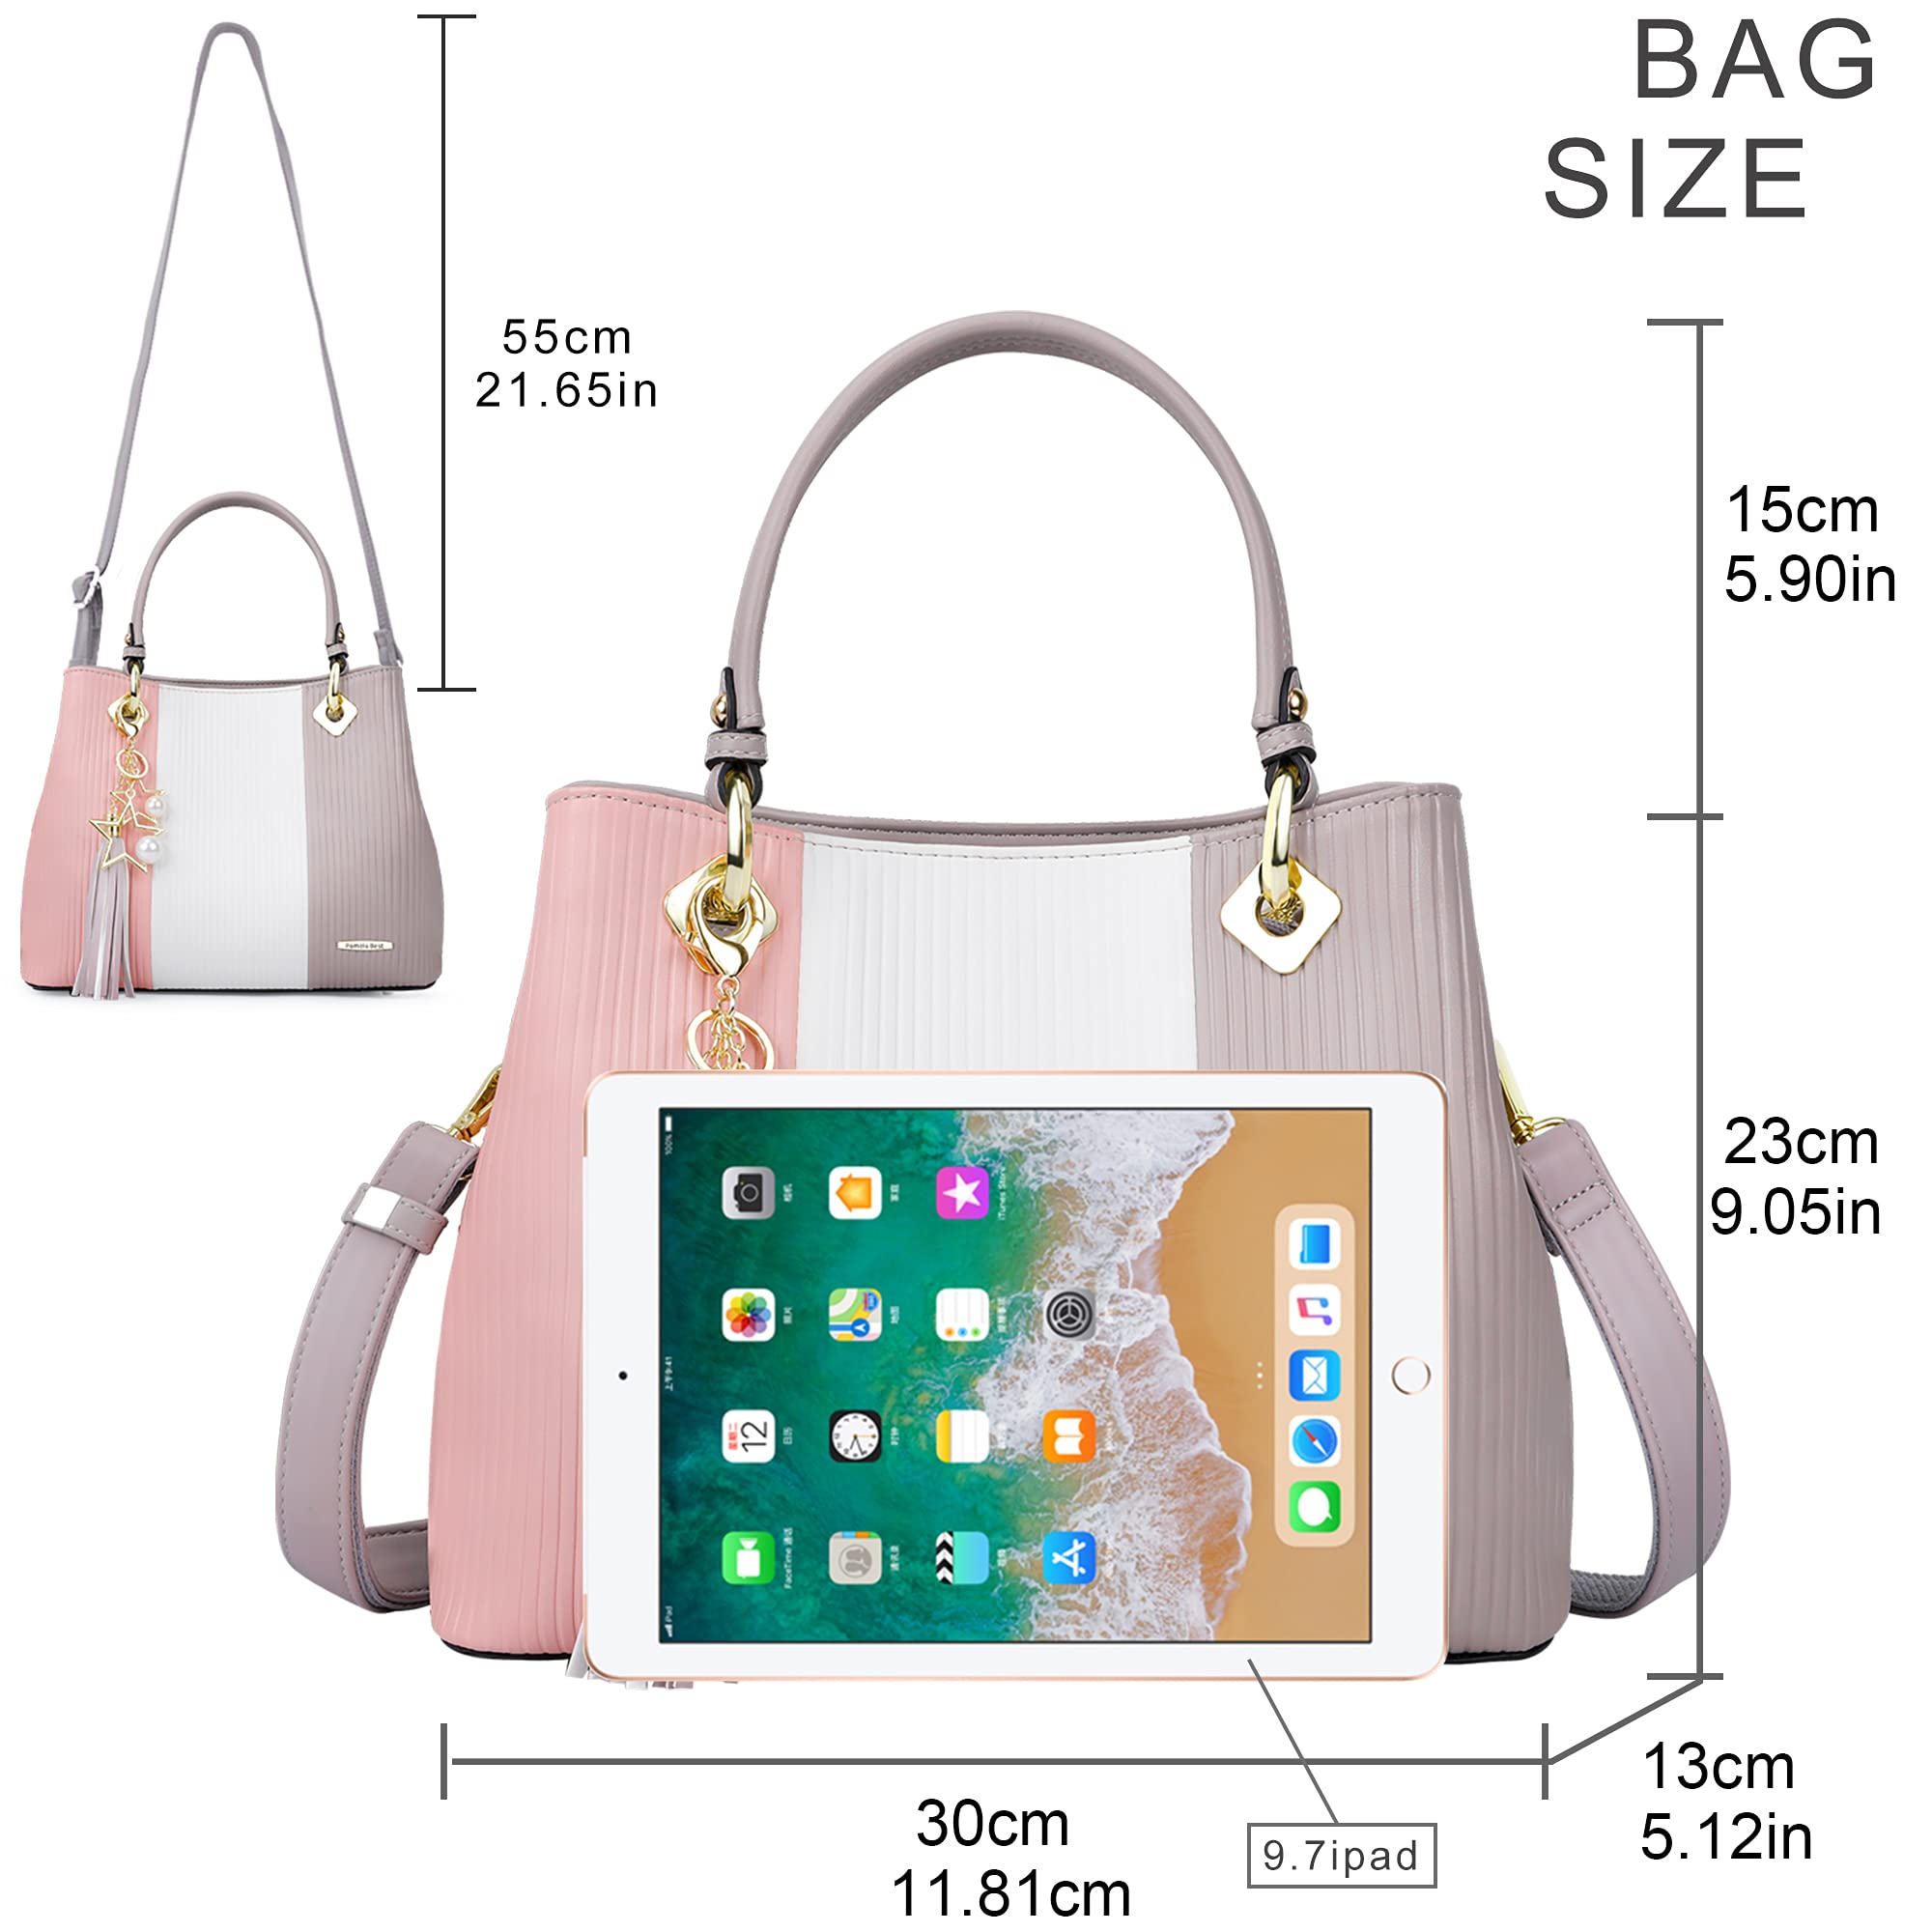 Handbags for Women with Multiple Internal Pockets in Pretty Color Combination